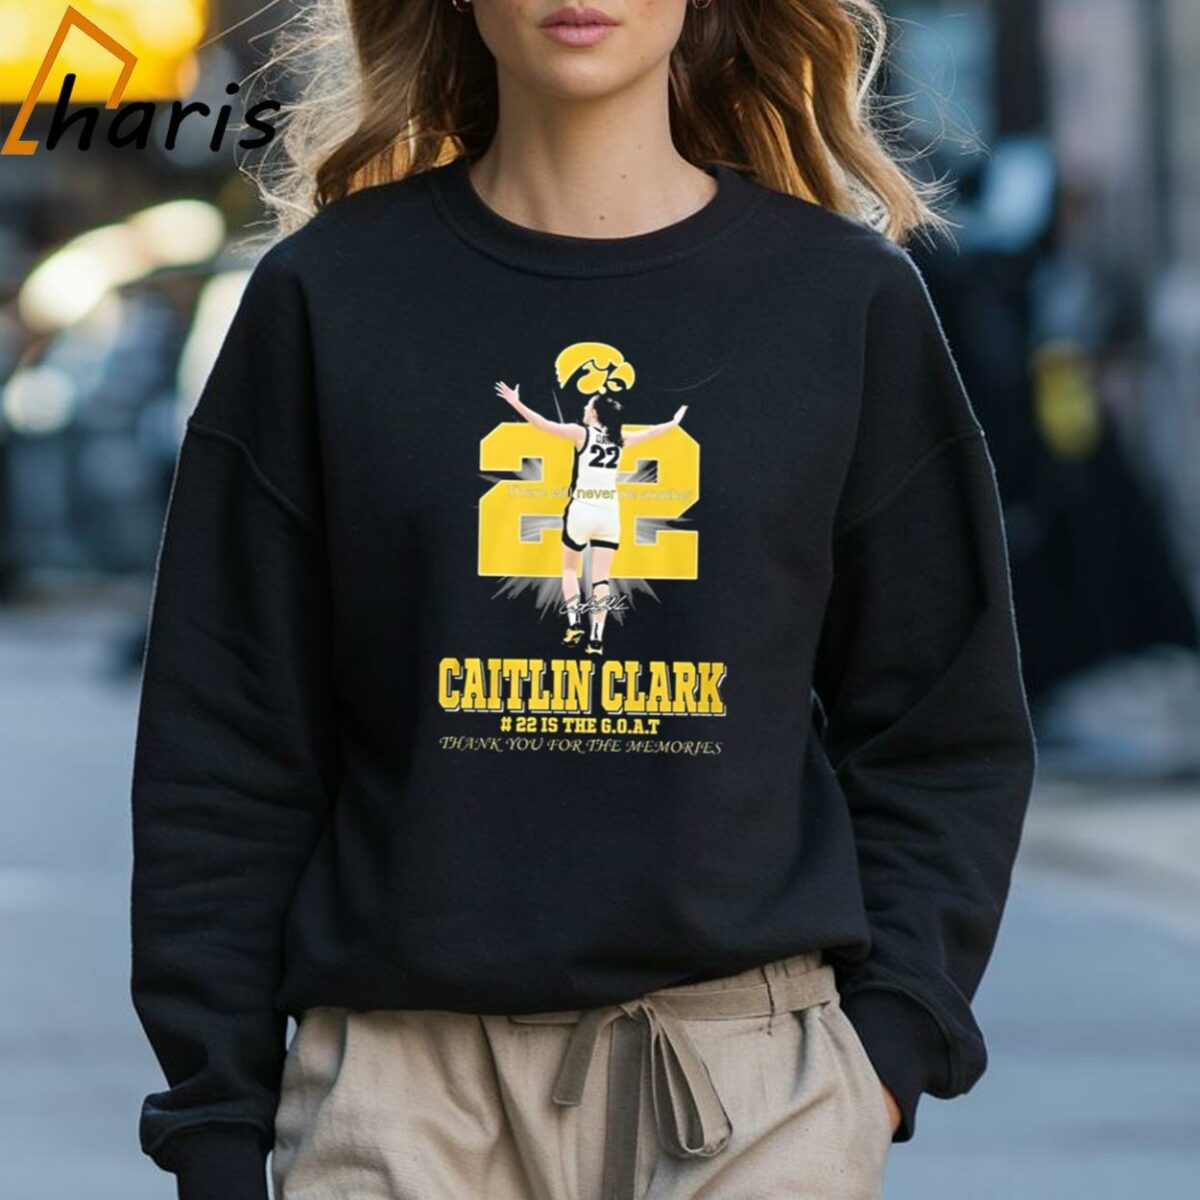 Caitlin Clark 22 Is The GOAT Thank You For The Memories Signature T shirt 3 Sweatshirt